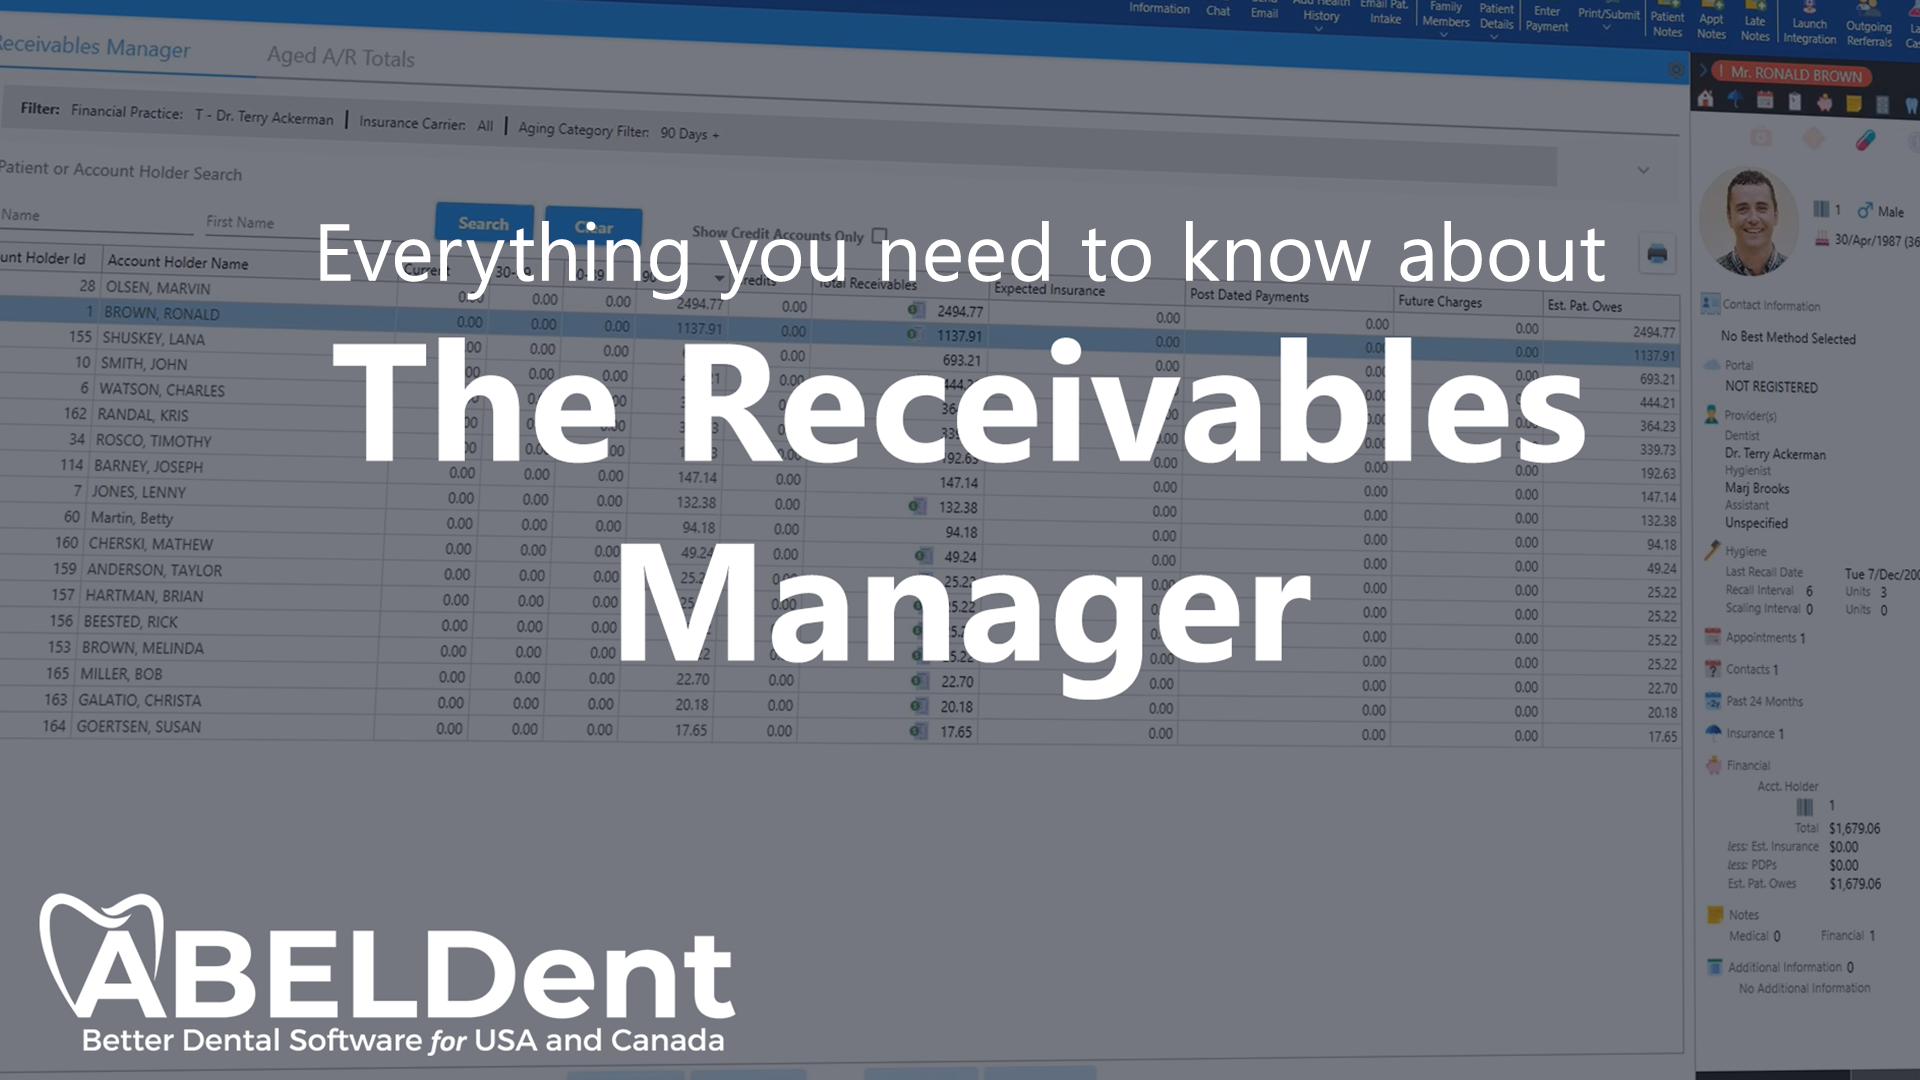 Everything you need to know about ABELDent’s Receivables Manager